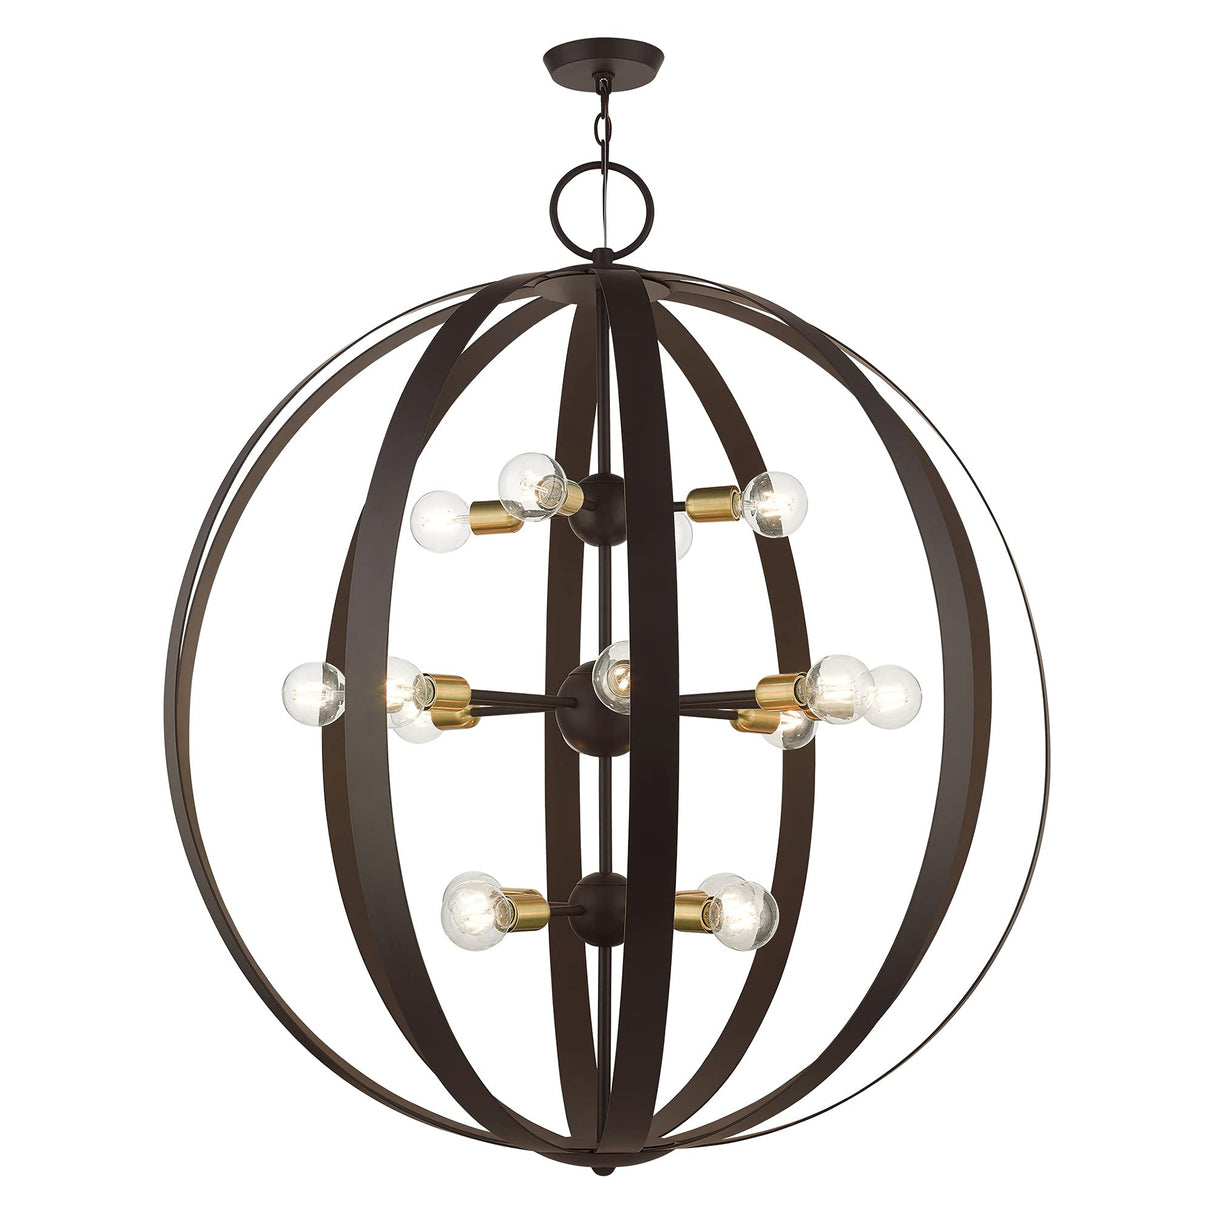 Livex Lighting 46418-07 Modesto Collection 16-Light Foyer Chandelier with Exposed Bulbs, Bronze